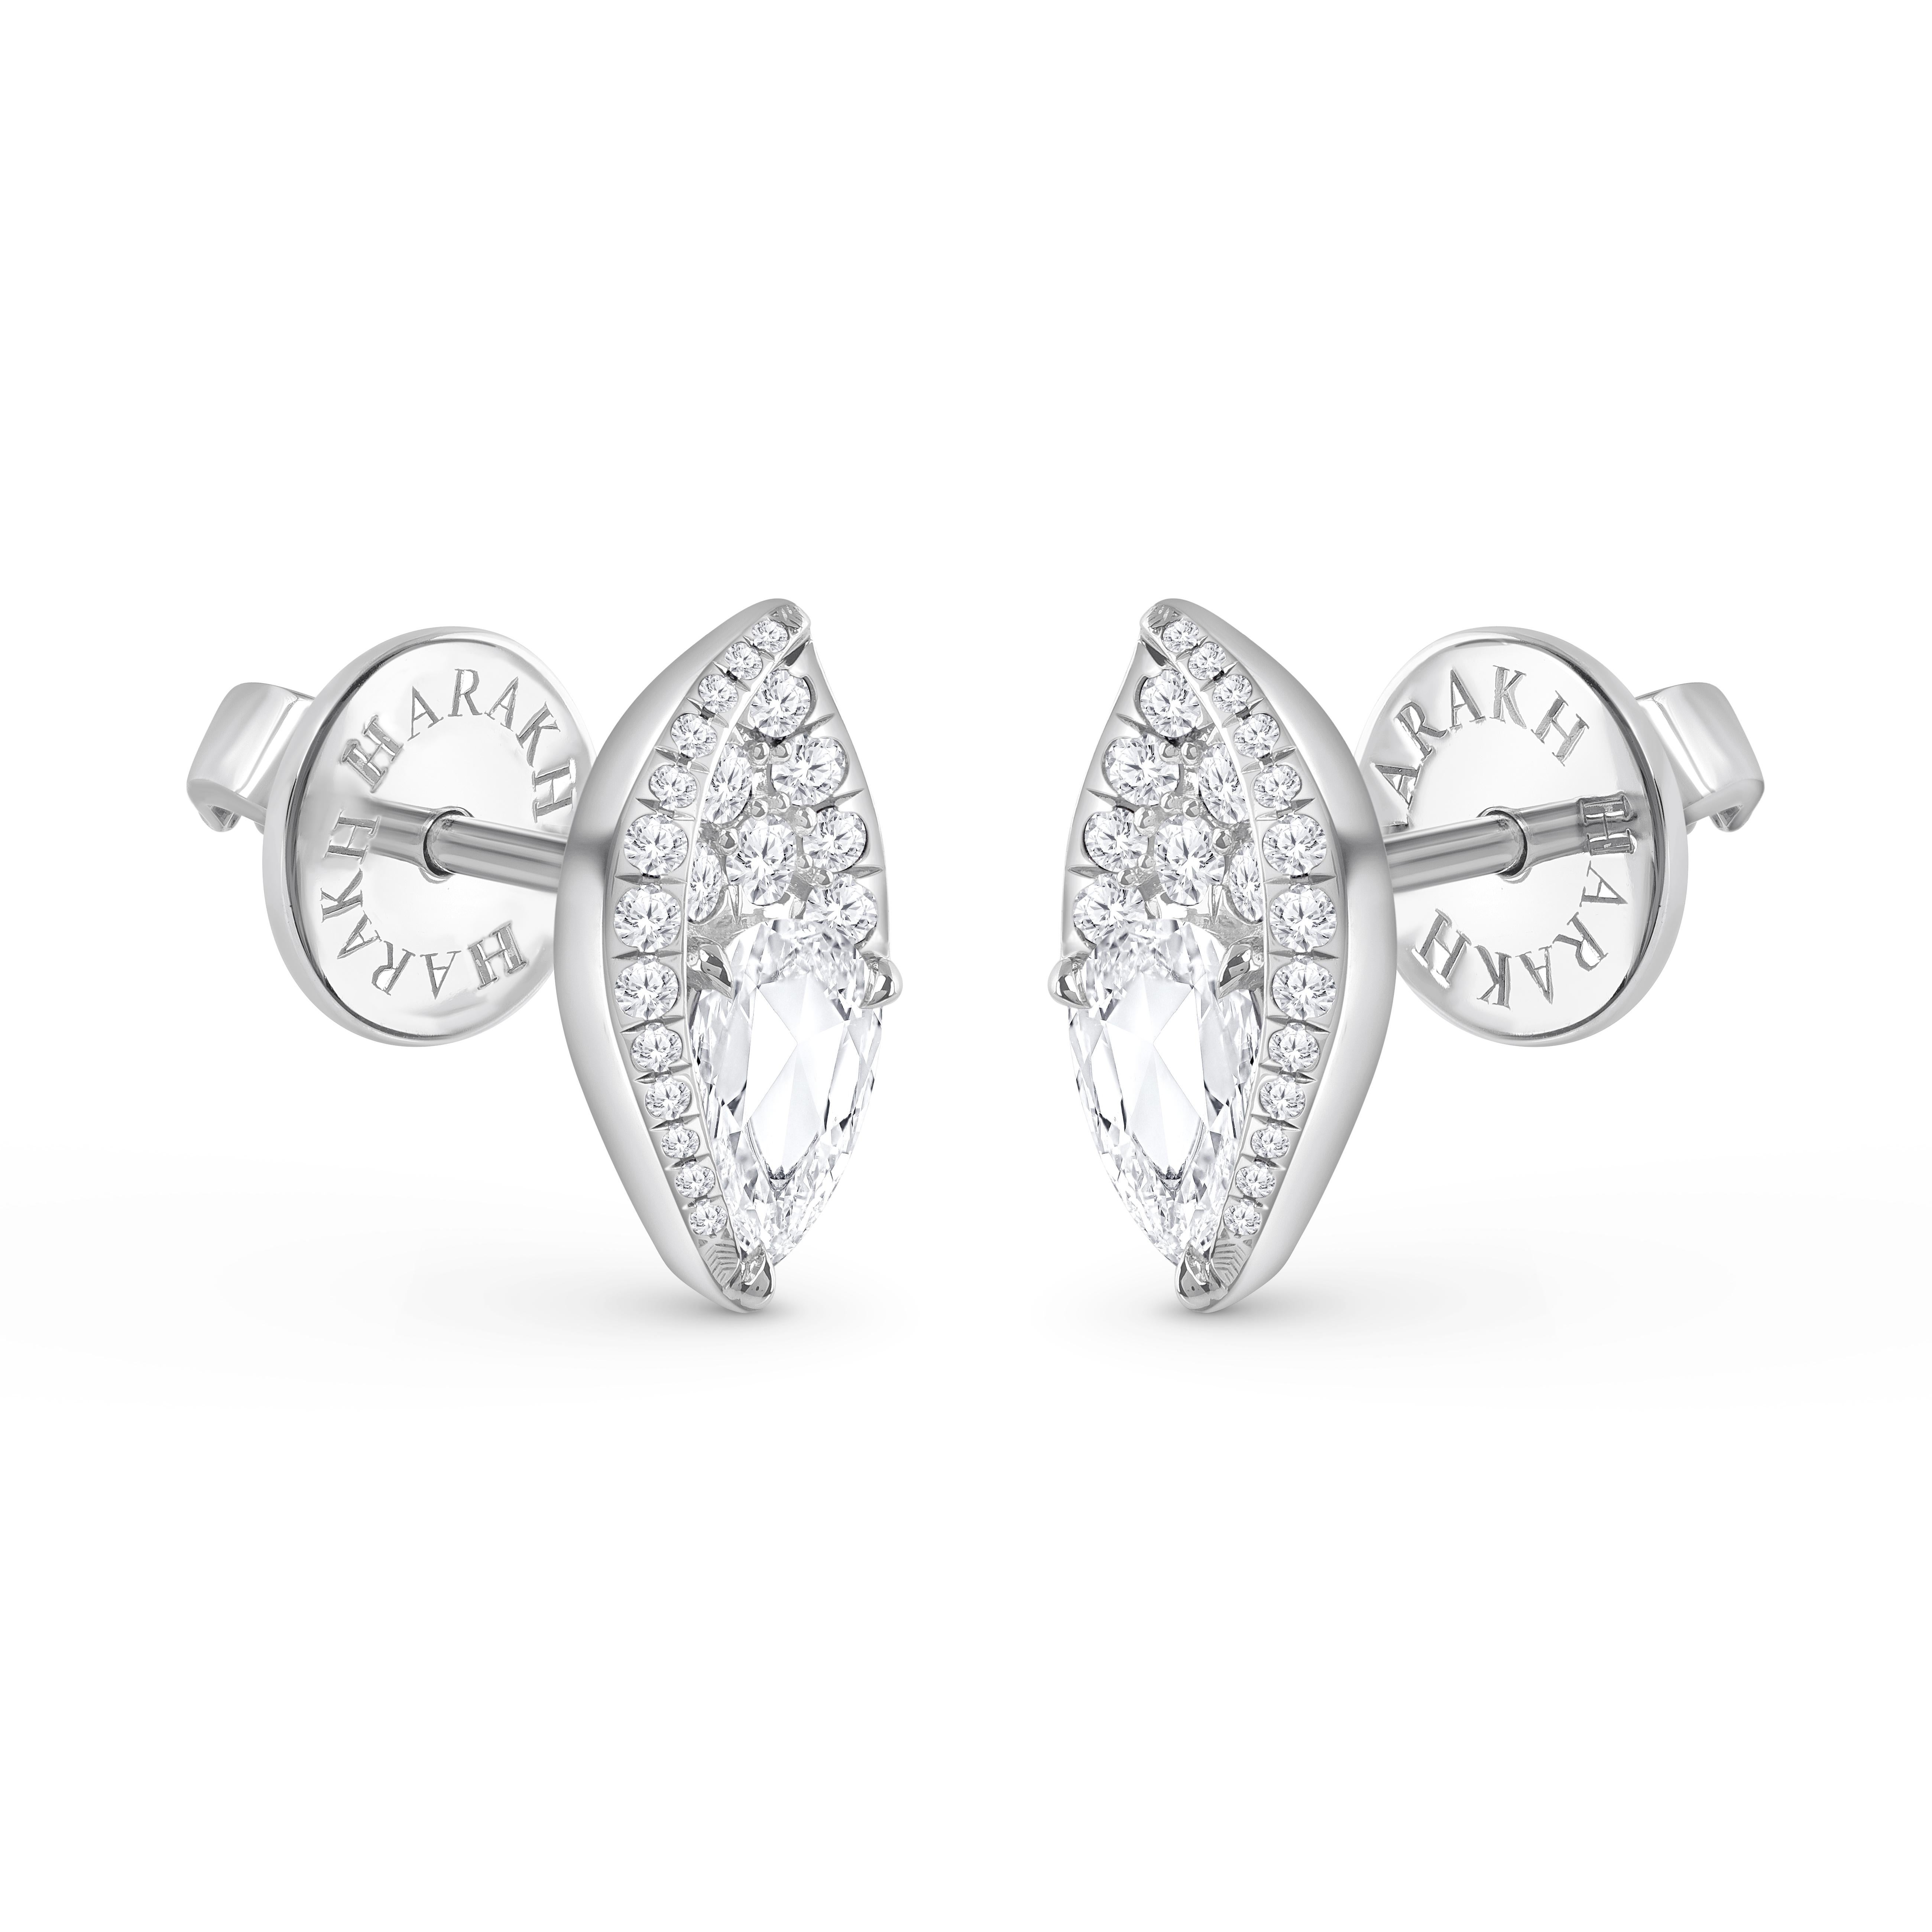 A brilliant cluster of diamonds comes together in these beautiful stud earrings. The diamonds are graded as F color and VS2 clarity. The total diamond weight of the earrings is 3/4 CT and these earrings are meticulously crafted in 18 KT white gold.